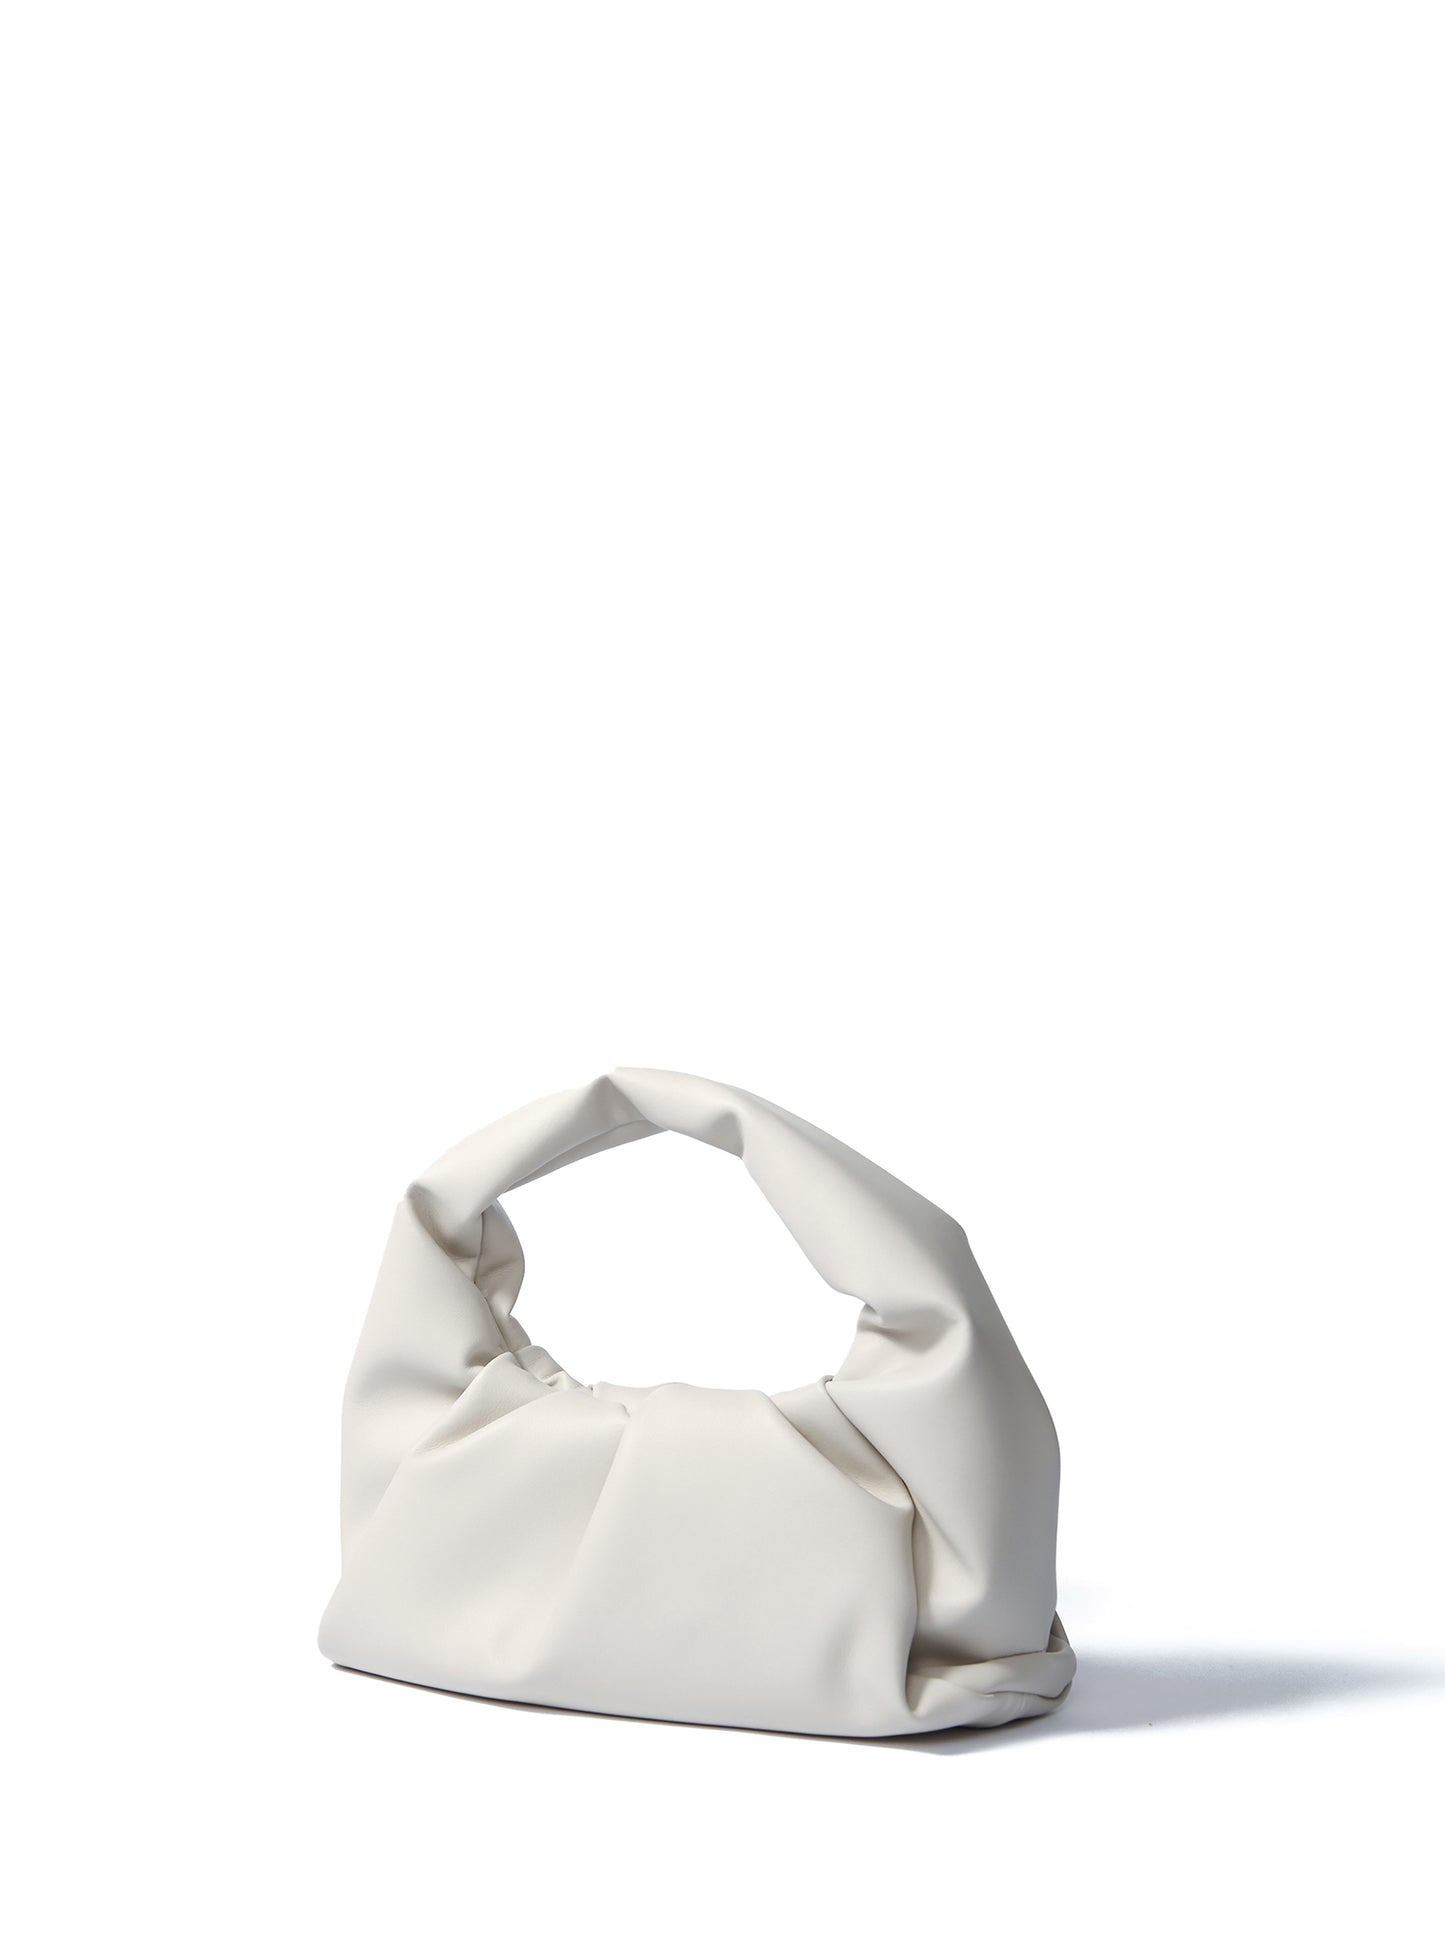 Marshmallow Croissant Bag in Soft Leather, White